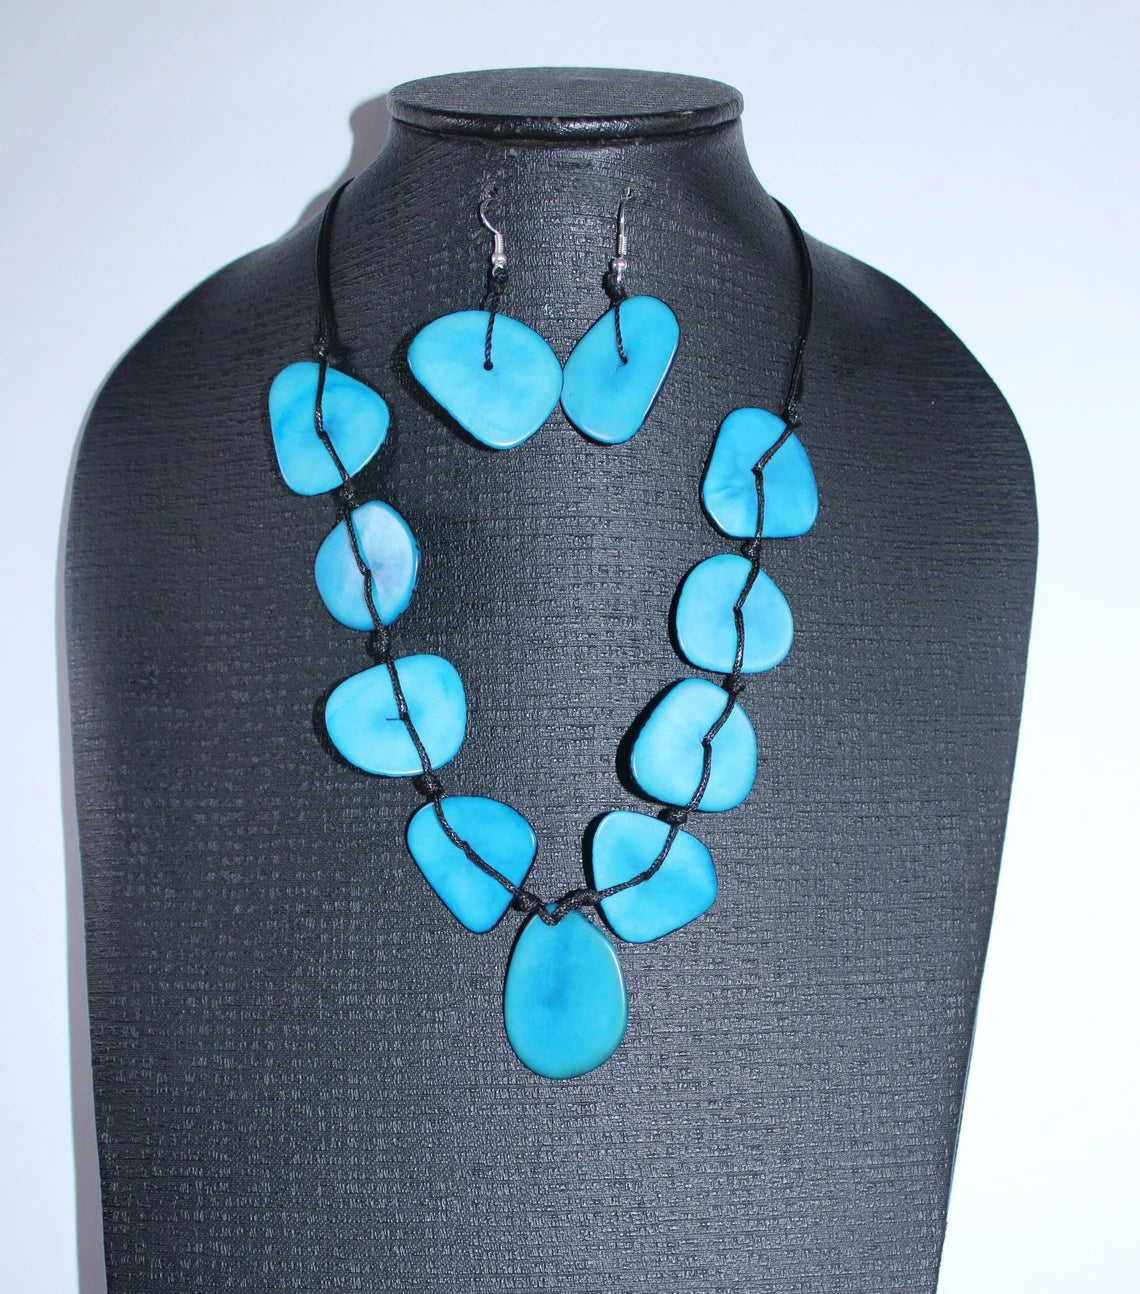 Tagua Necklace and Earrings Set in Blue Color